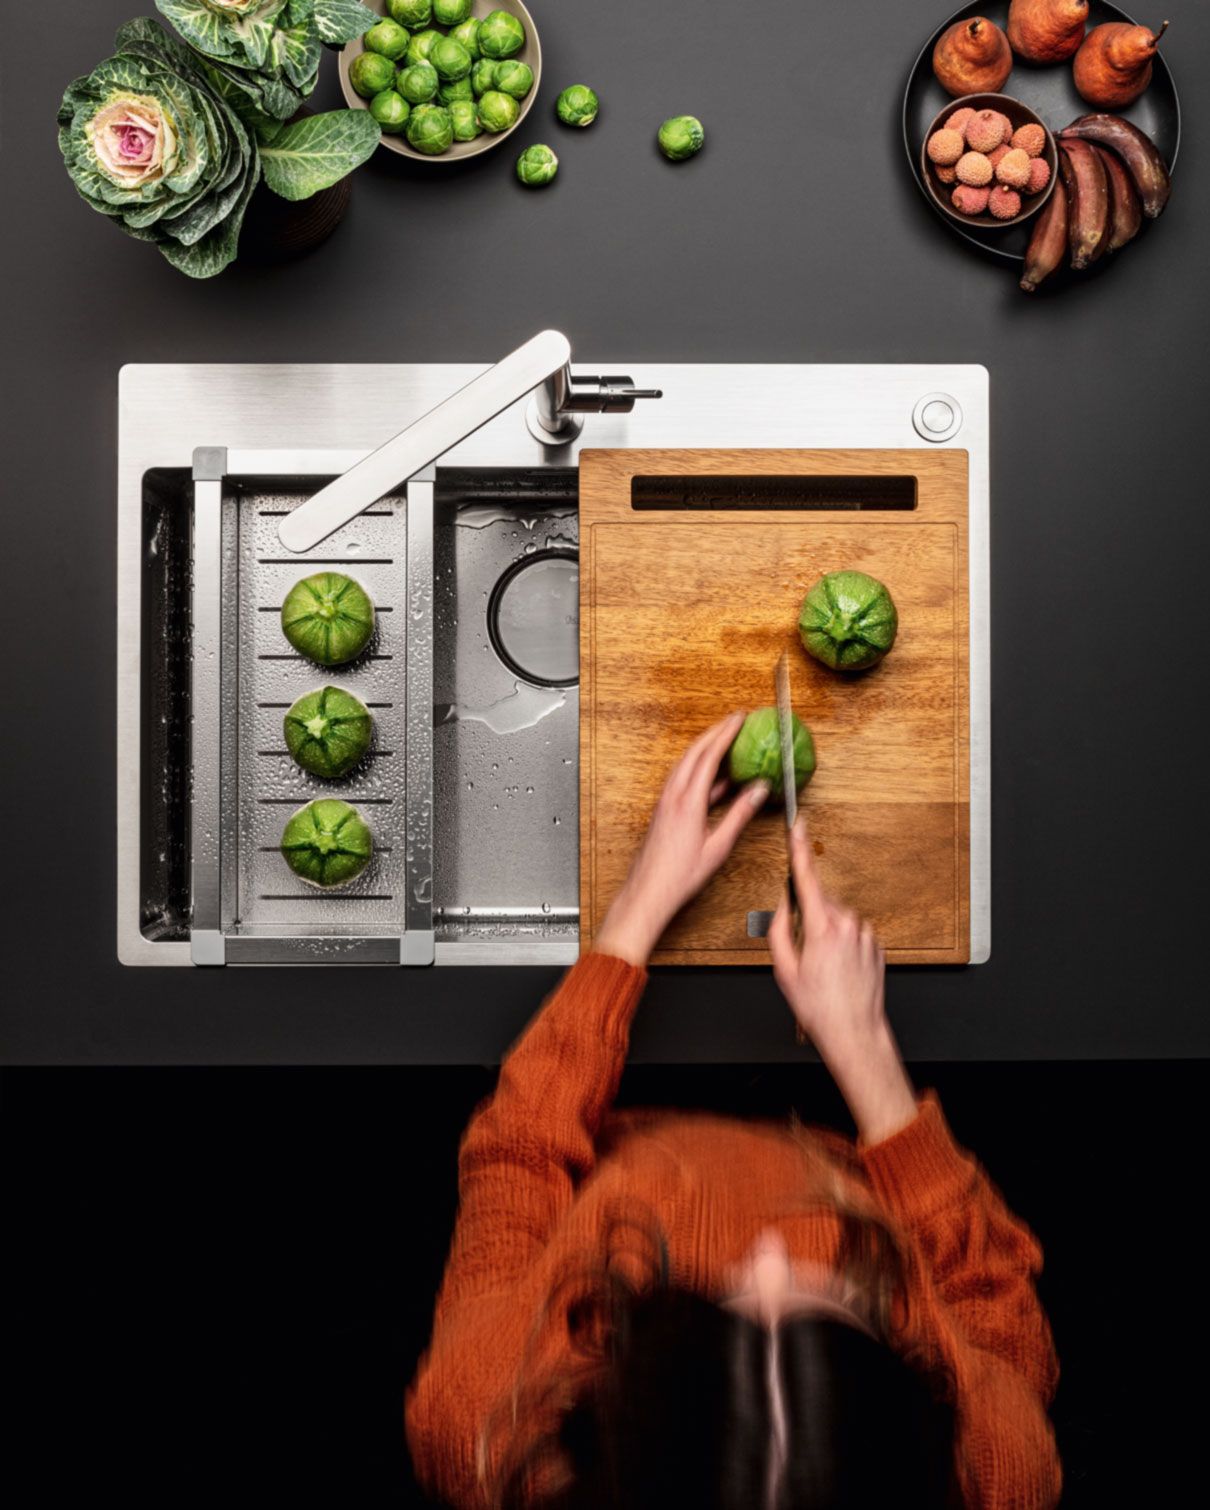 From cooker hoods to integrated cooking systems